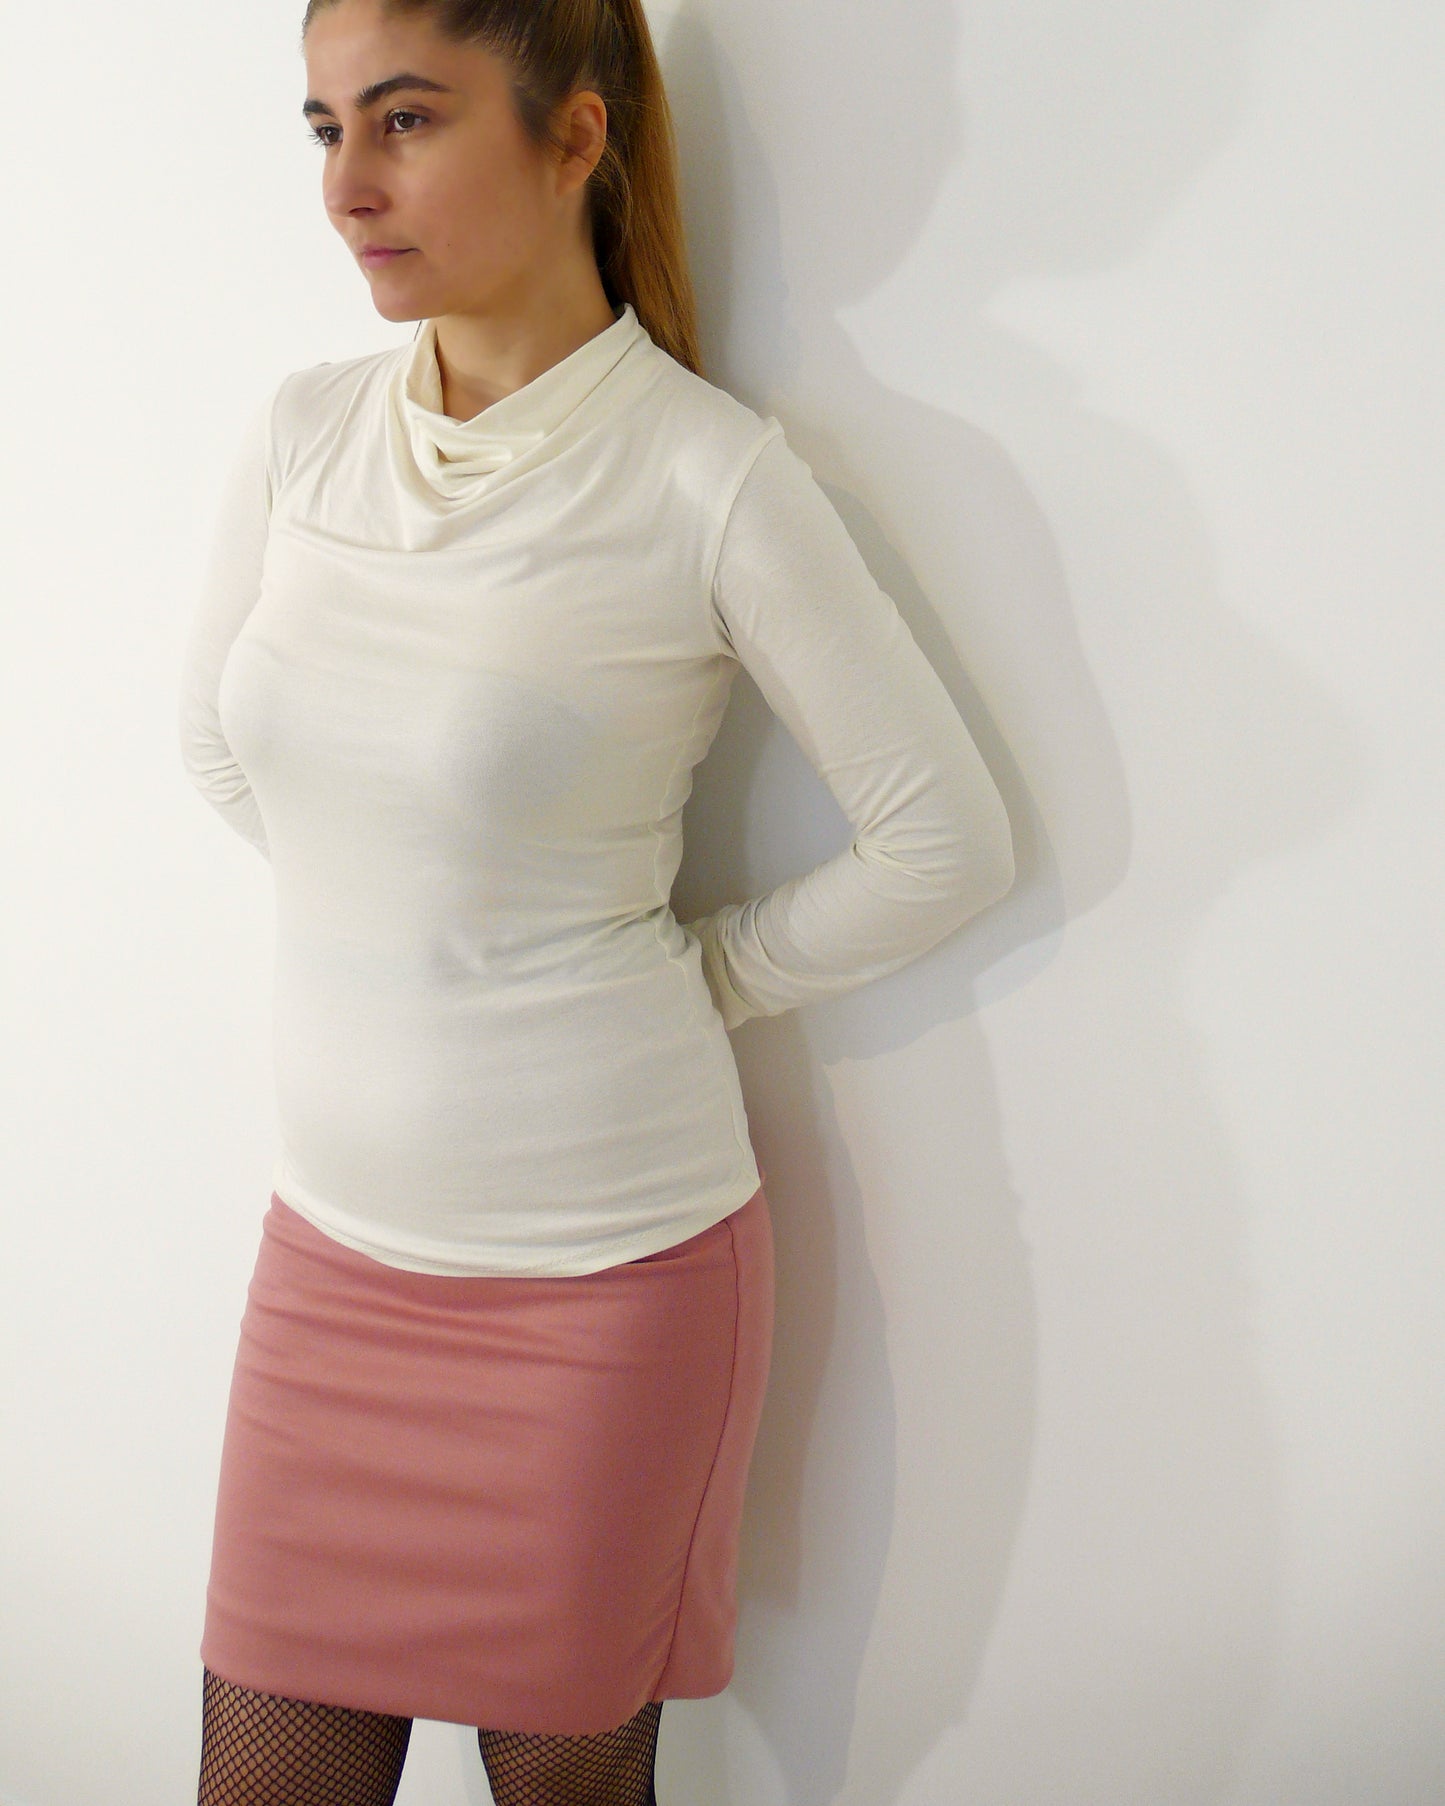 A woman wearing a fitted long-sleeved cowl neck top and a bodycon skirt stands against a white wall with her arms crossed behind her back.